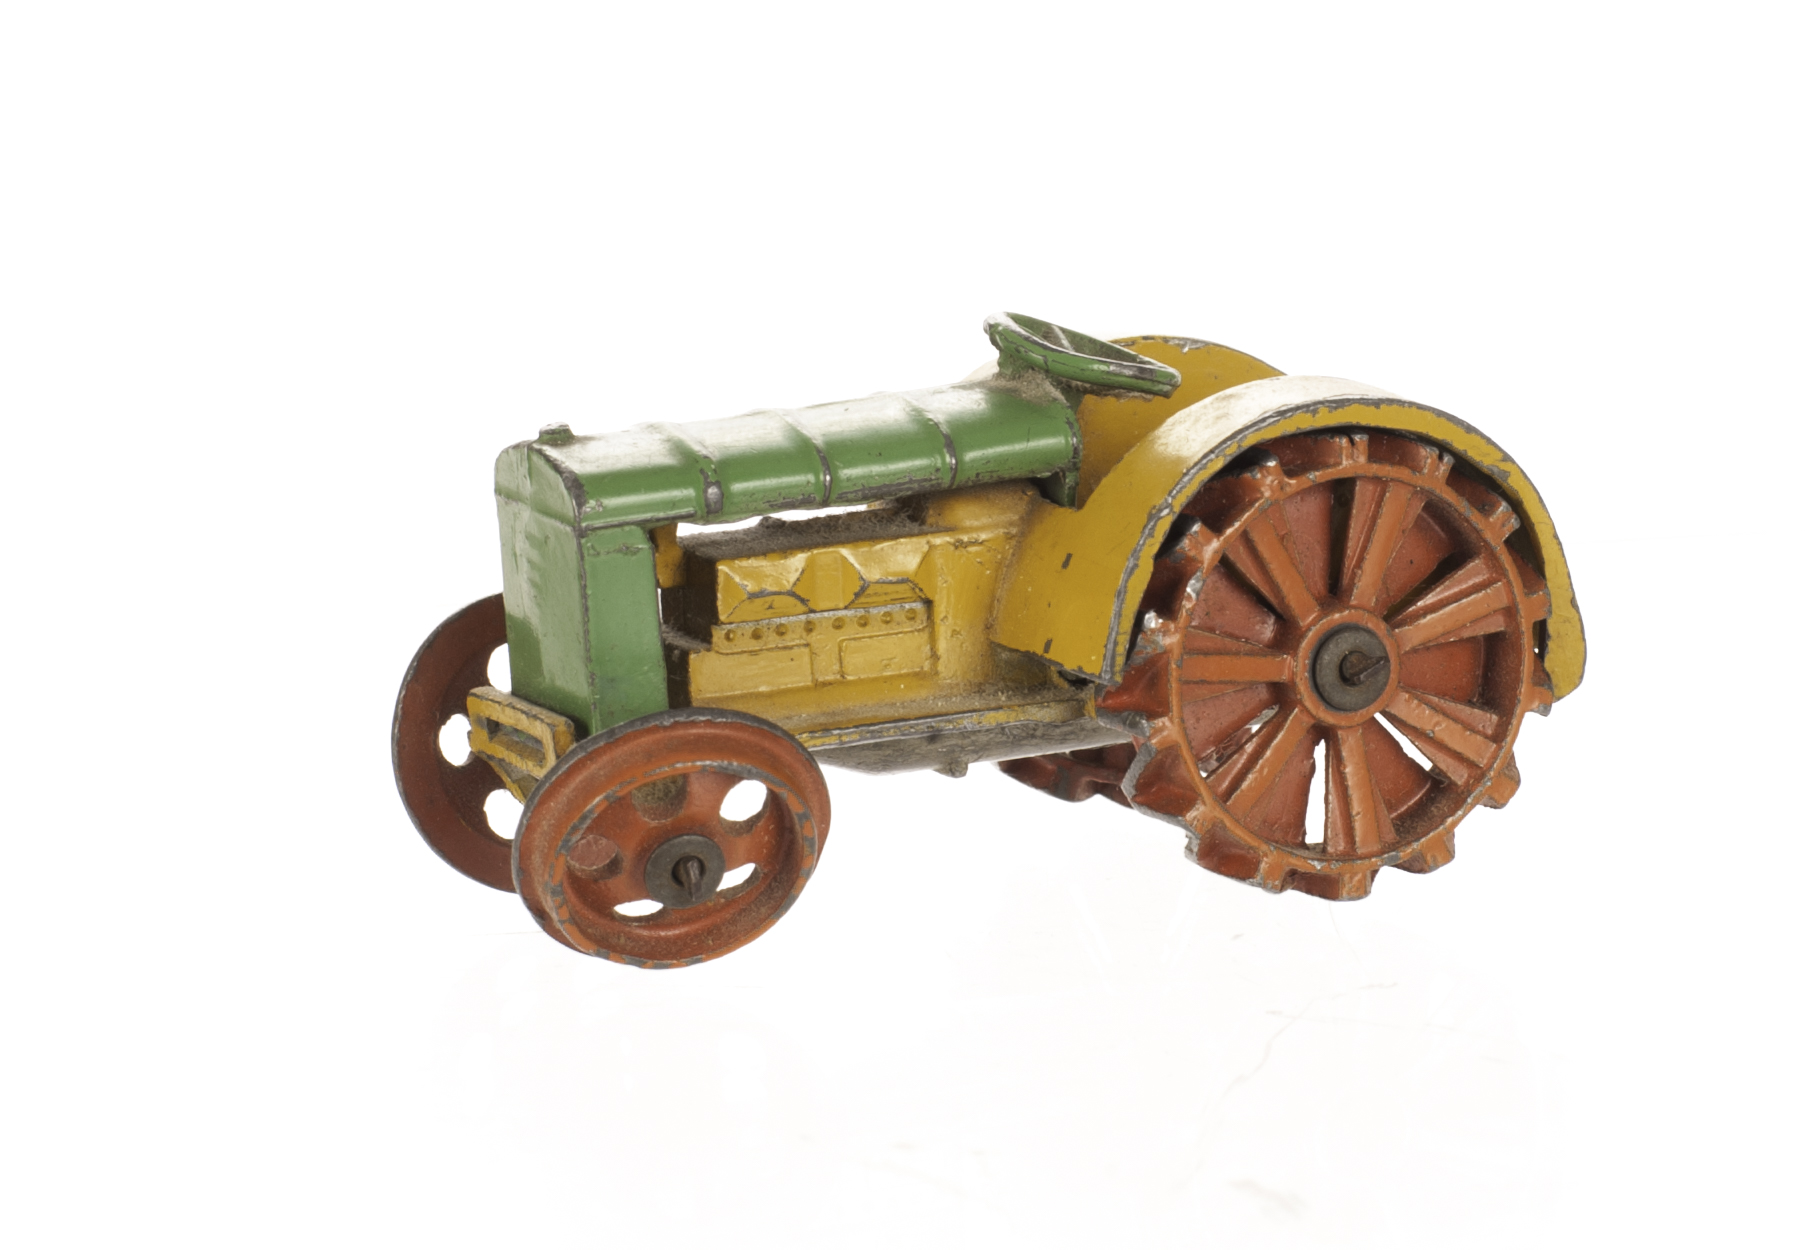 A Pre-War Dinky Toys 22e Farm Tractor, Dinky Toys' cast-in, with hook, green/yellow body, red